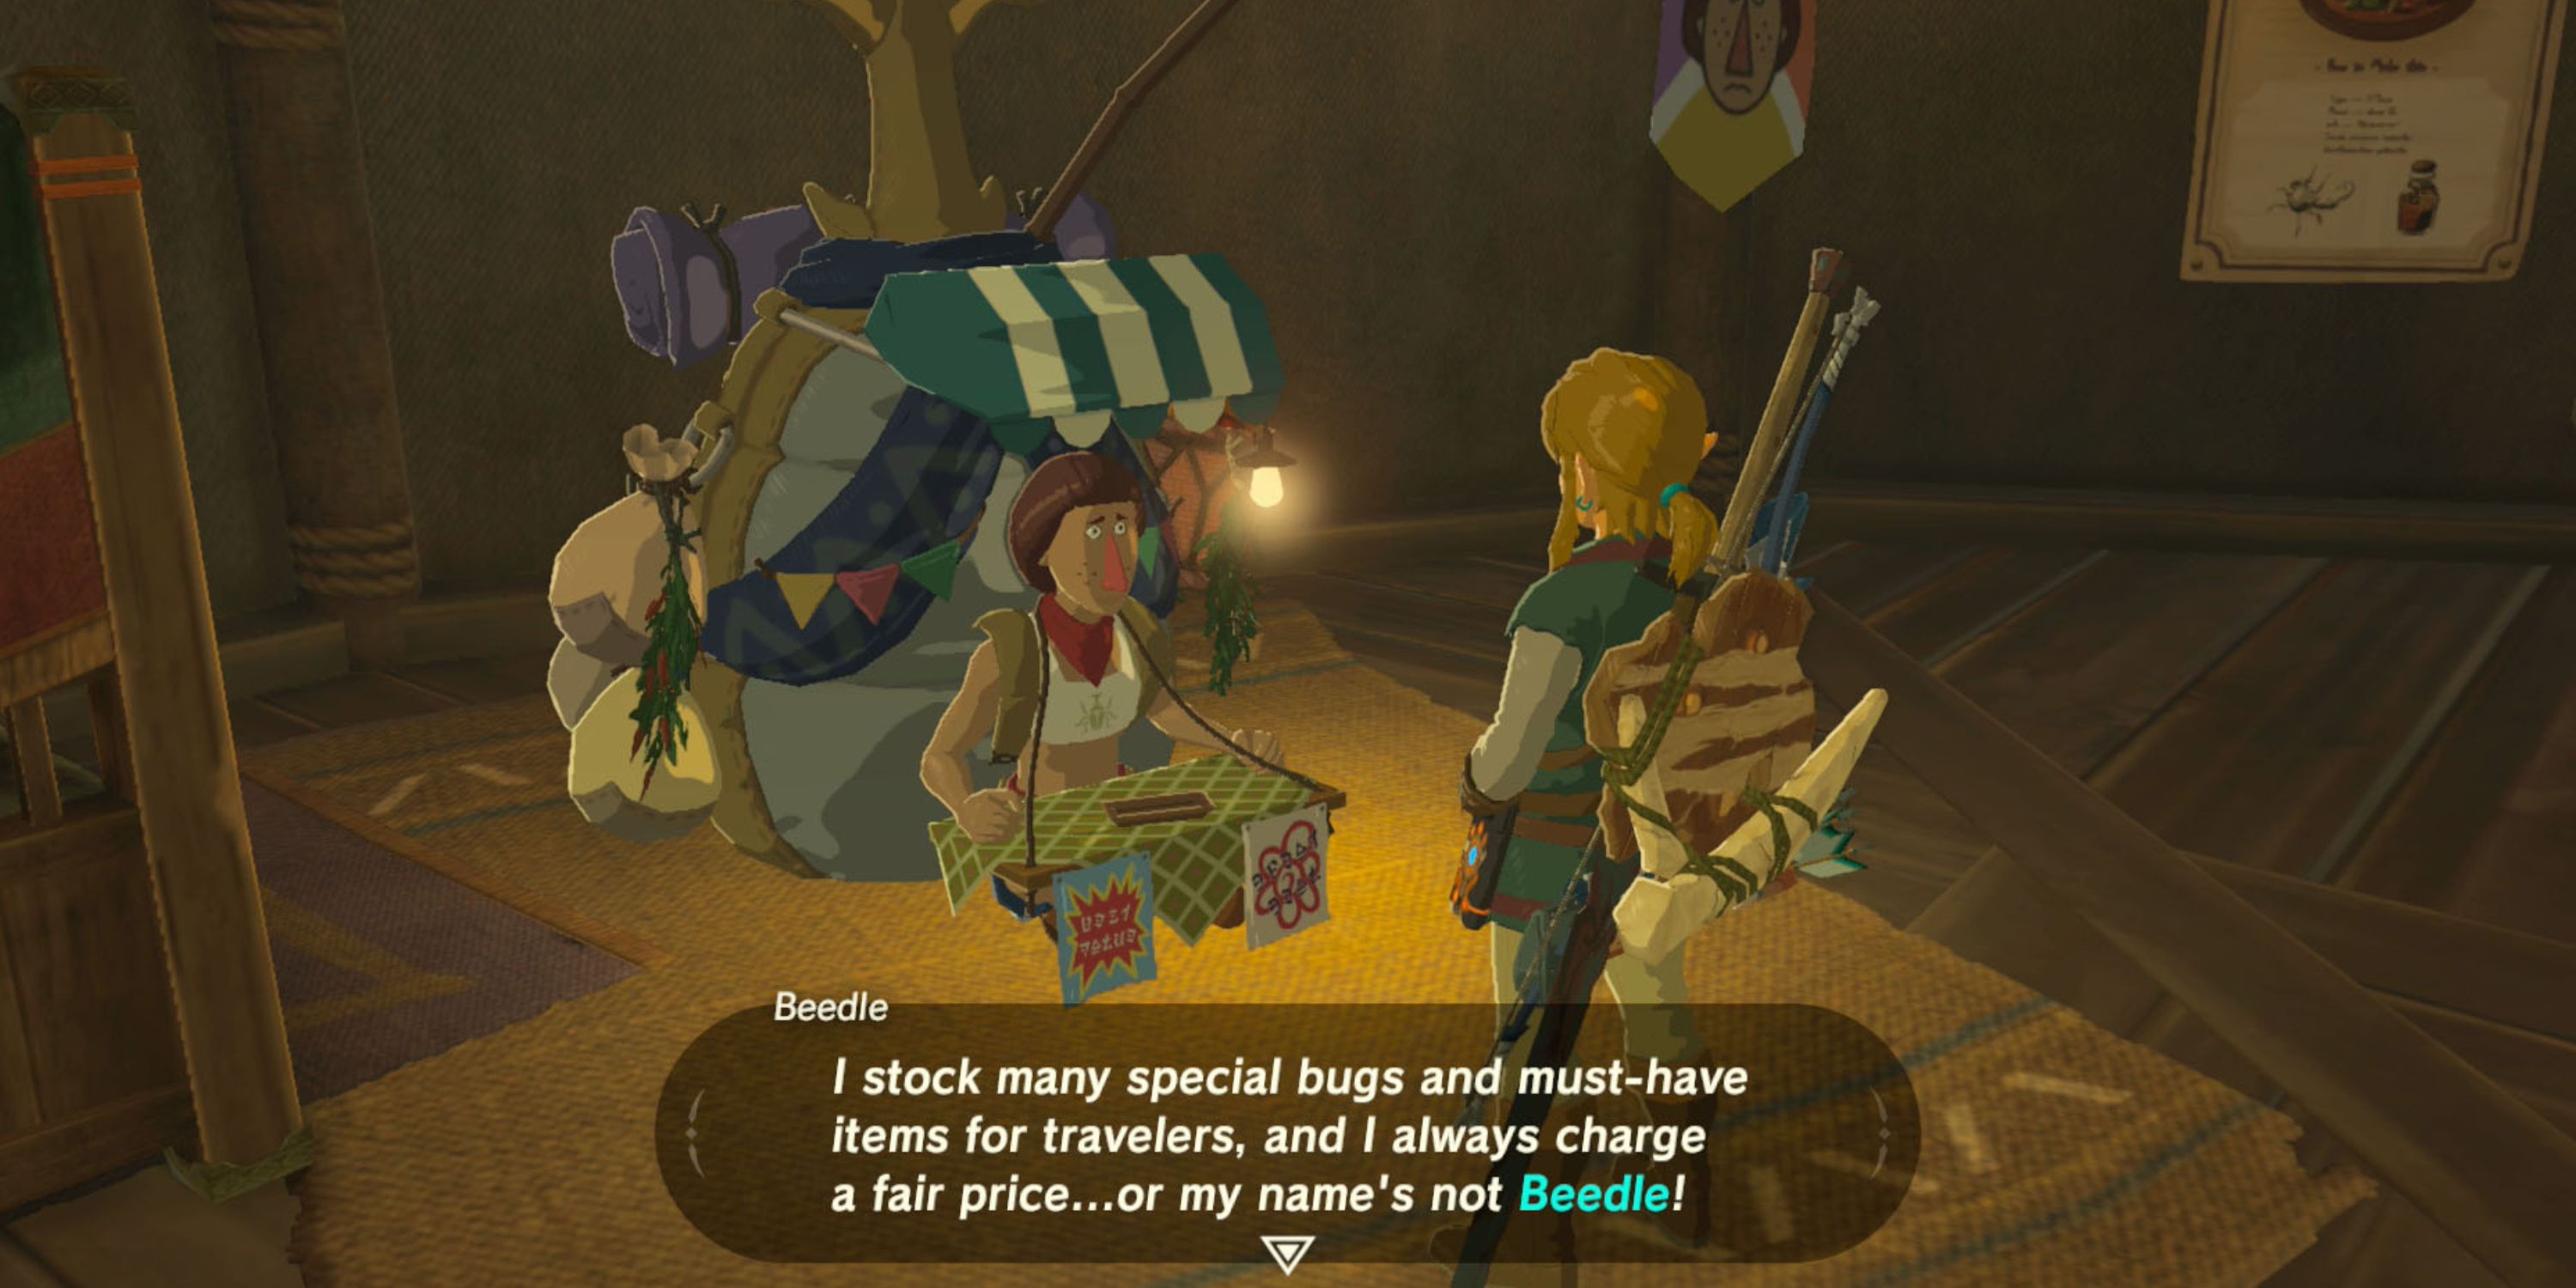 Beedle talks to Link about his wares